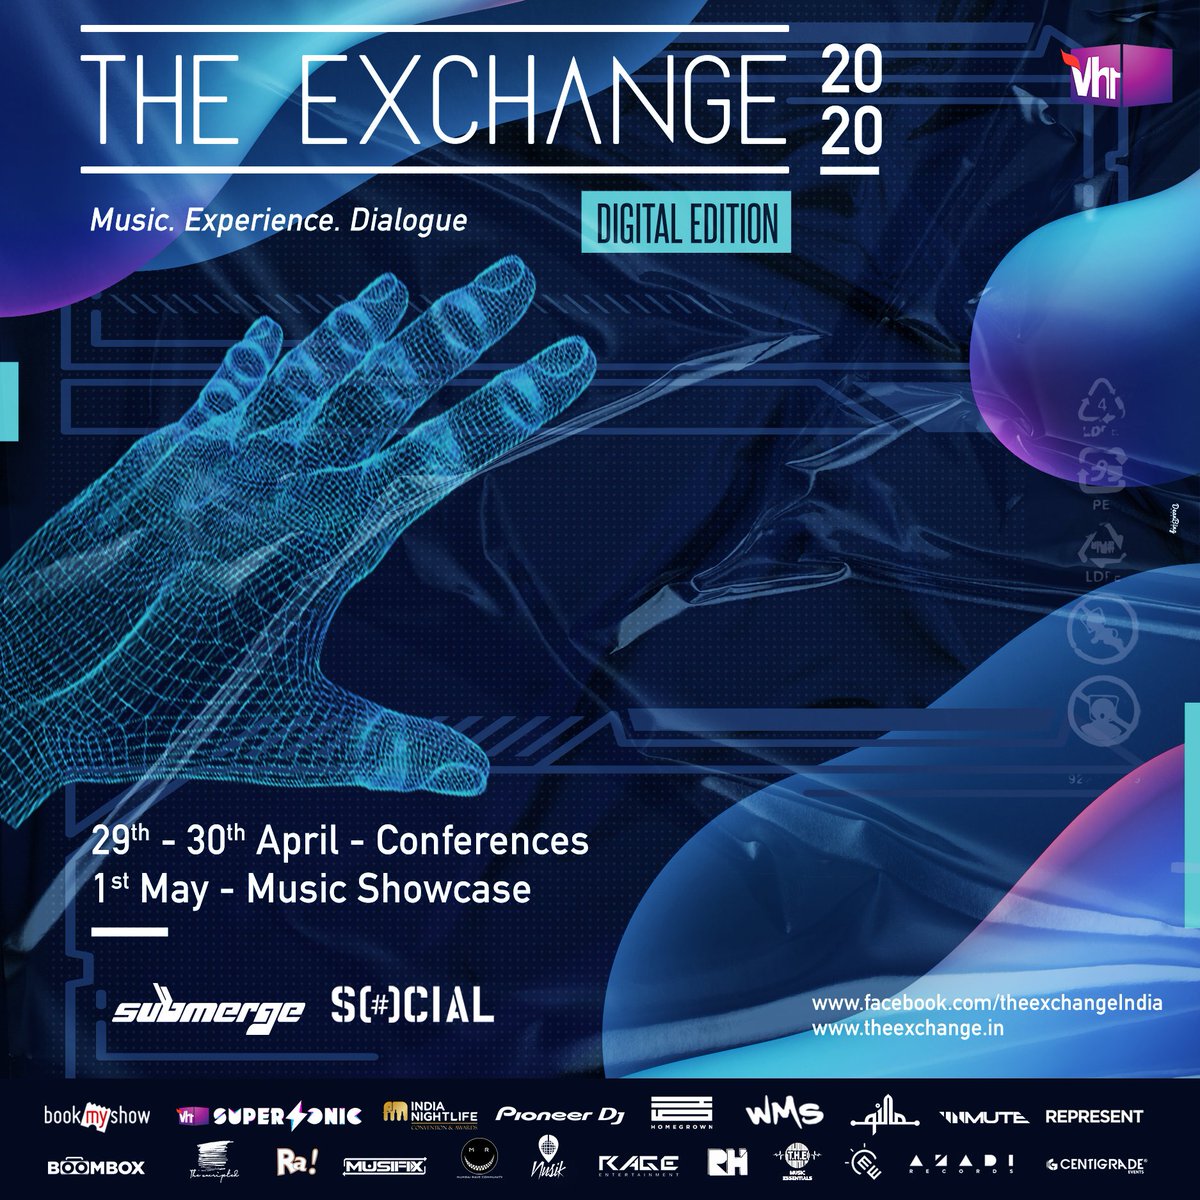 #TheExchange2020 covers 2 days of conferences and brain synergies followed by a 3rd day for the musical showcase.
This year, each & every one of you gets to be involved with us, learn, discover & exchange. Let's just say it's our way give back to the community, in our own way 😊